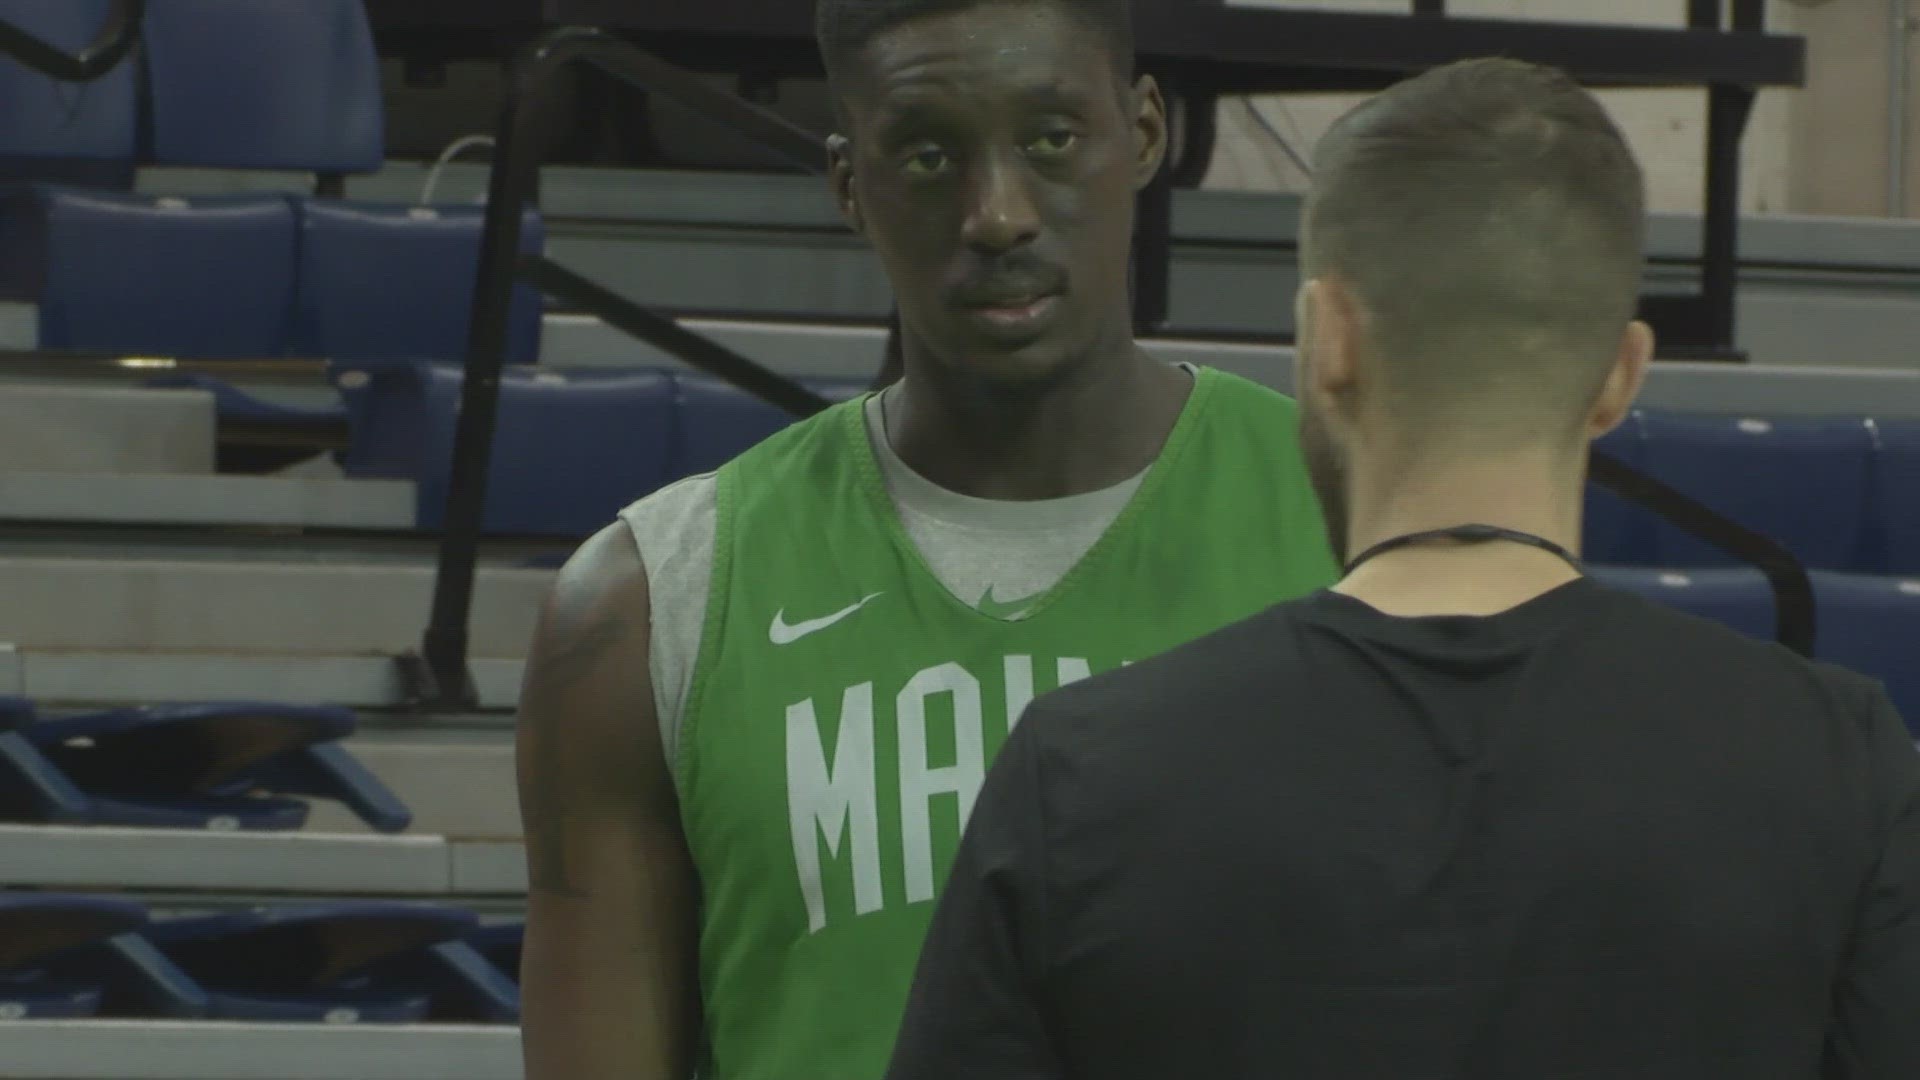 The Celtics' home opener at the Expo will be Friday at 7. Maine will have a handful of new players along with a new coach this season.